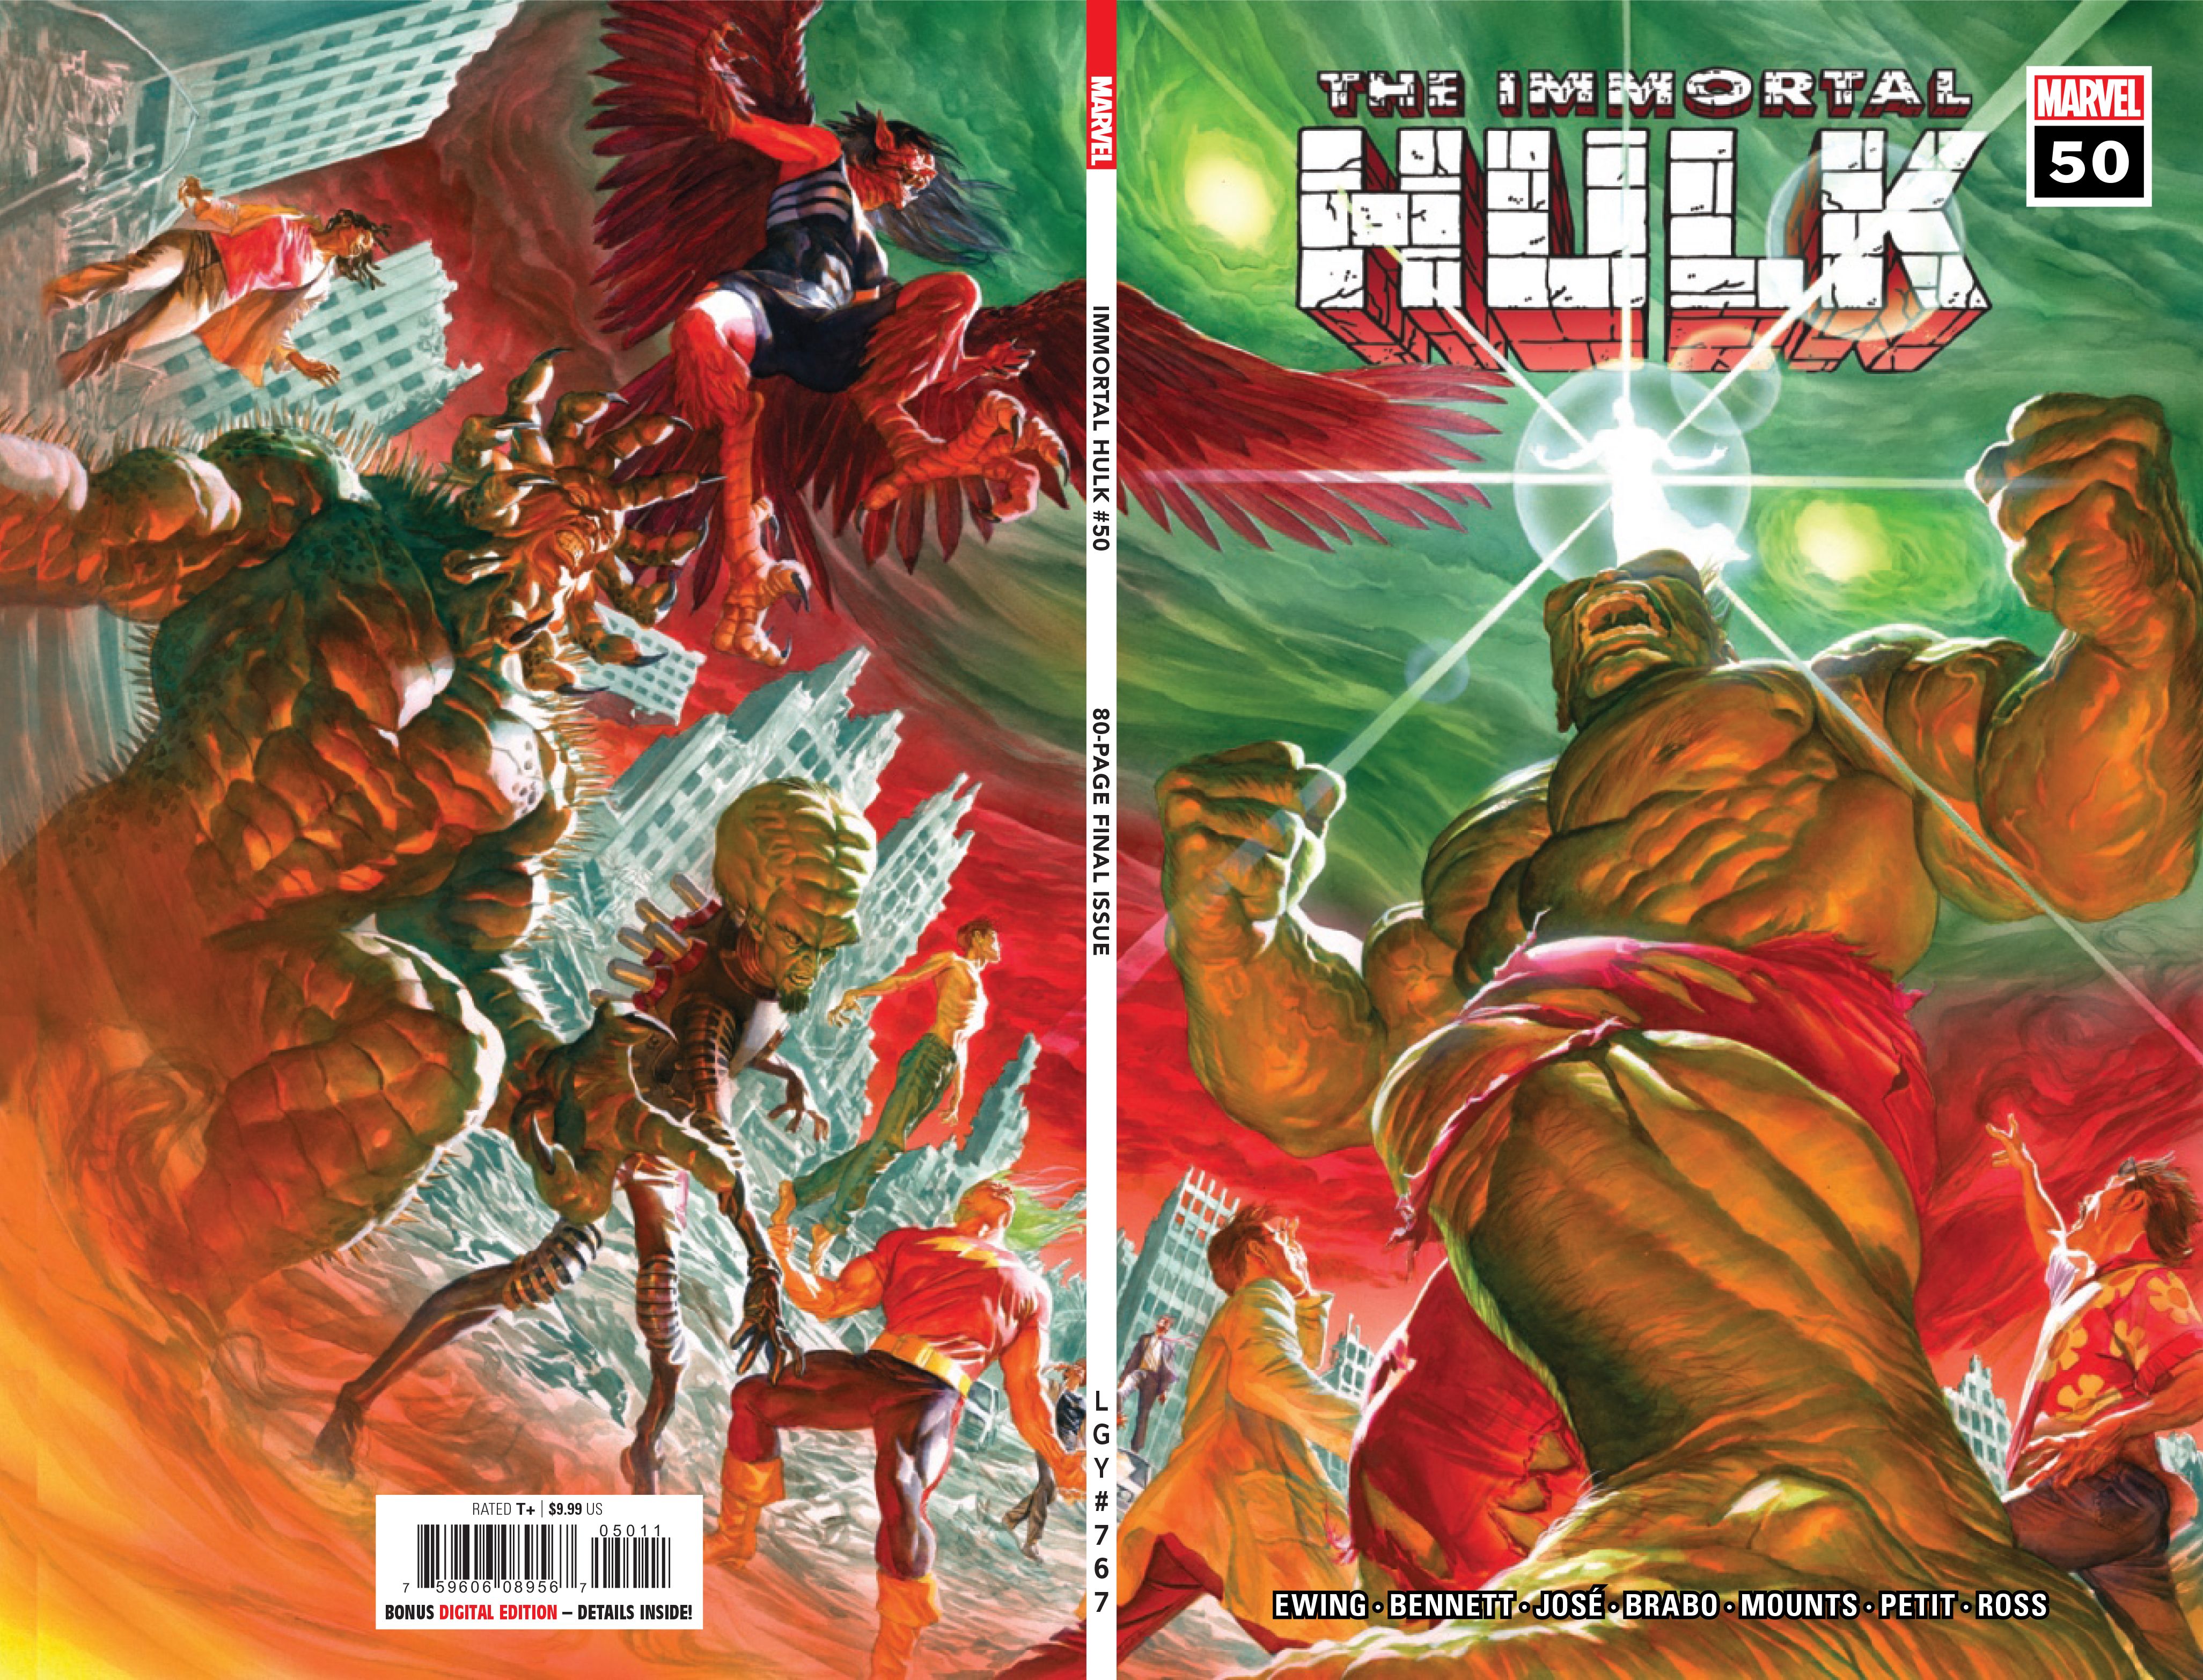 Covers for Hulk #50, by Al Ewing and Joe Bennett.